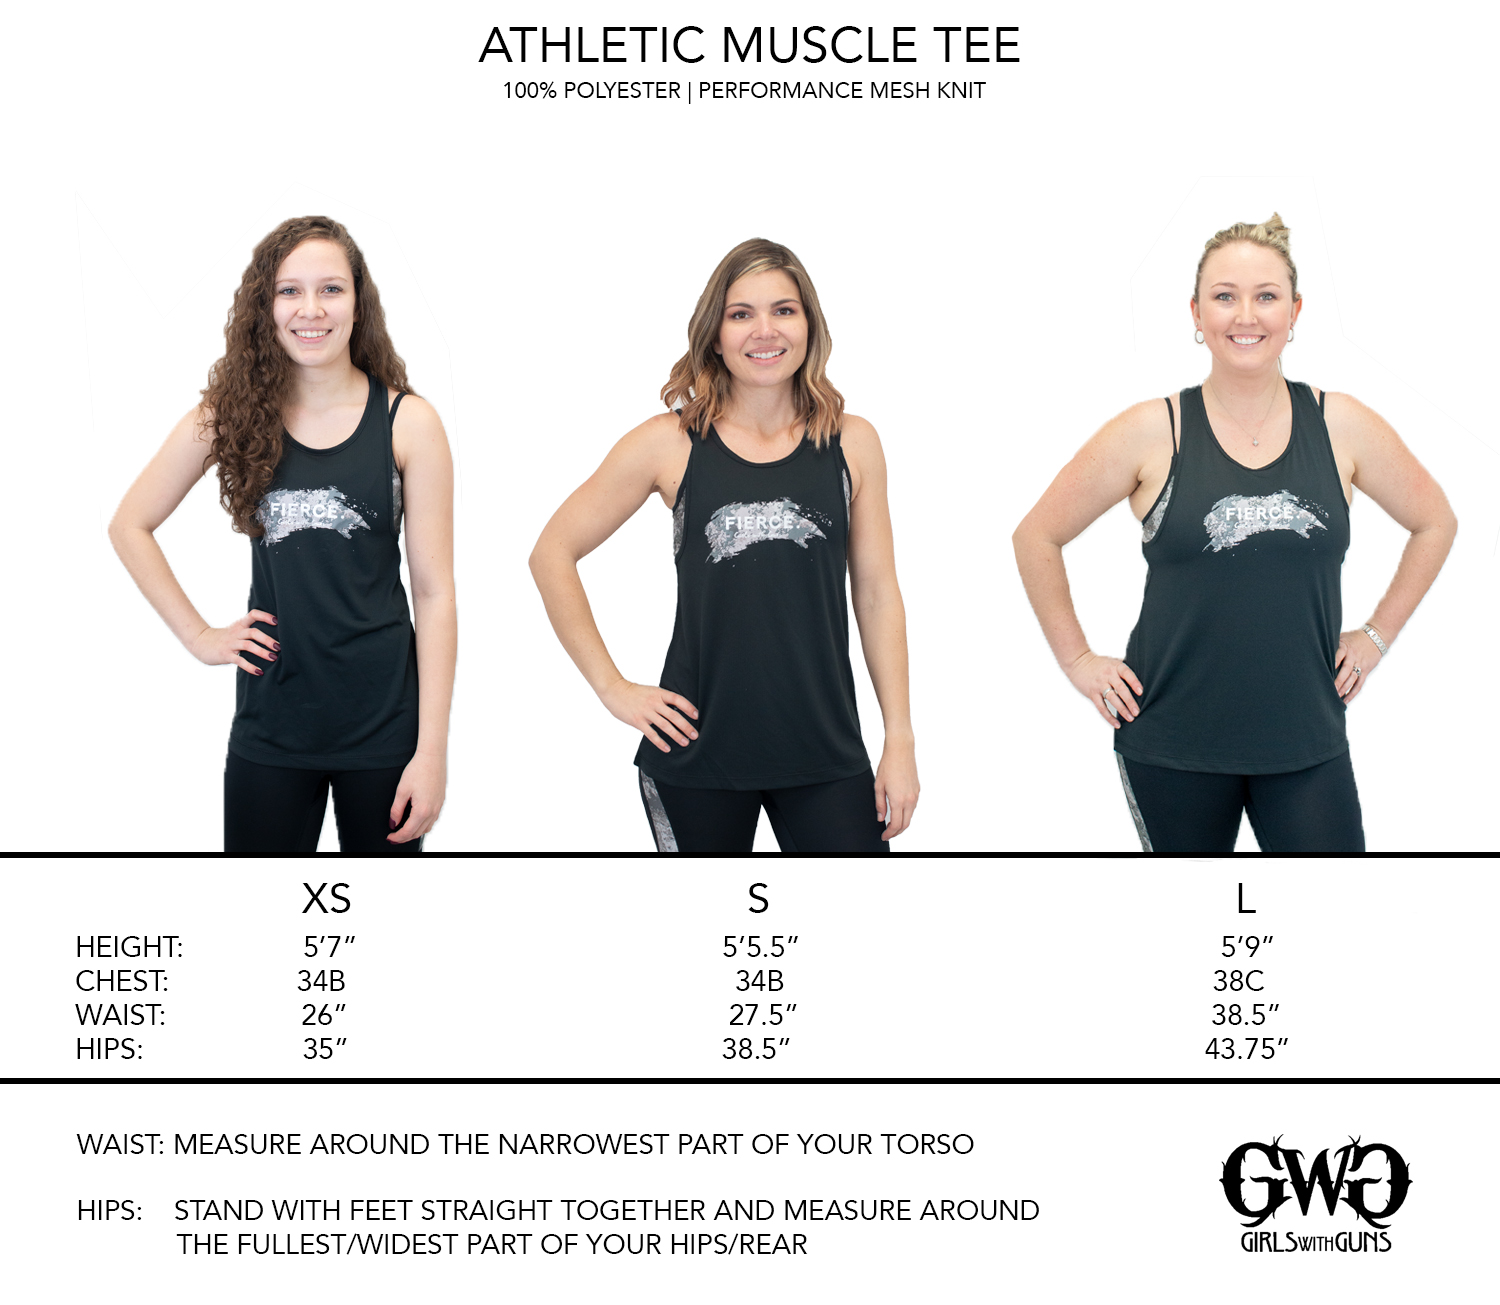 What Size Muscle Shirt Should I Wear? An Athlete's Size Guide